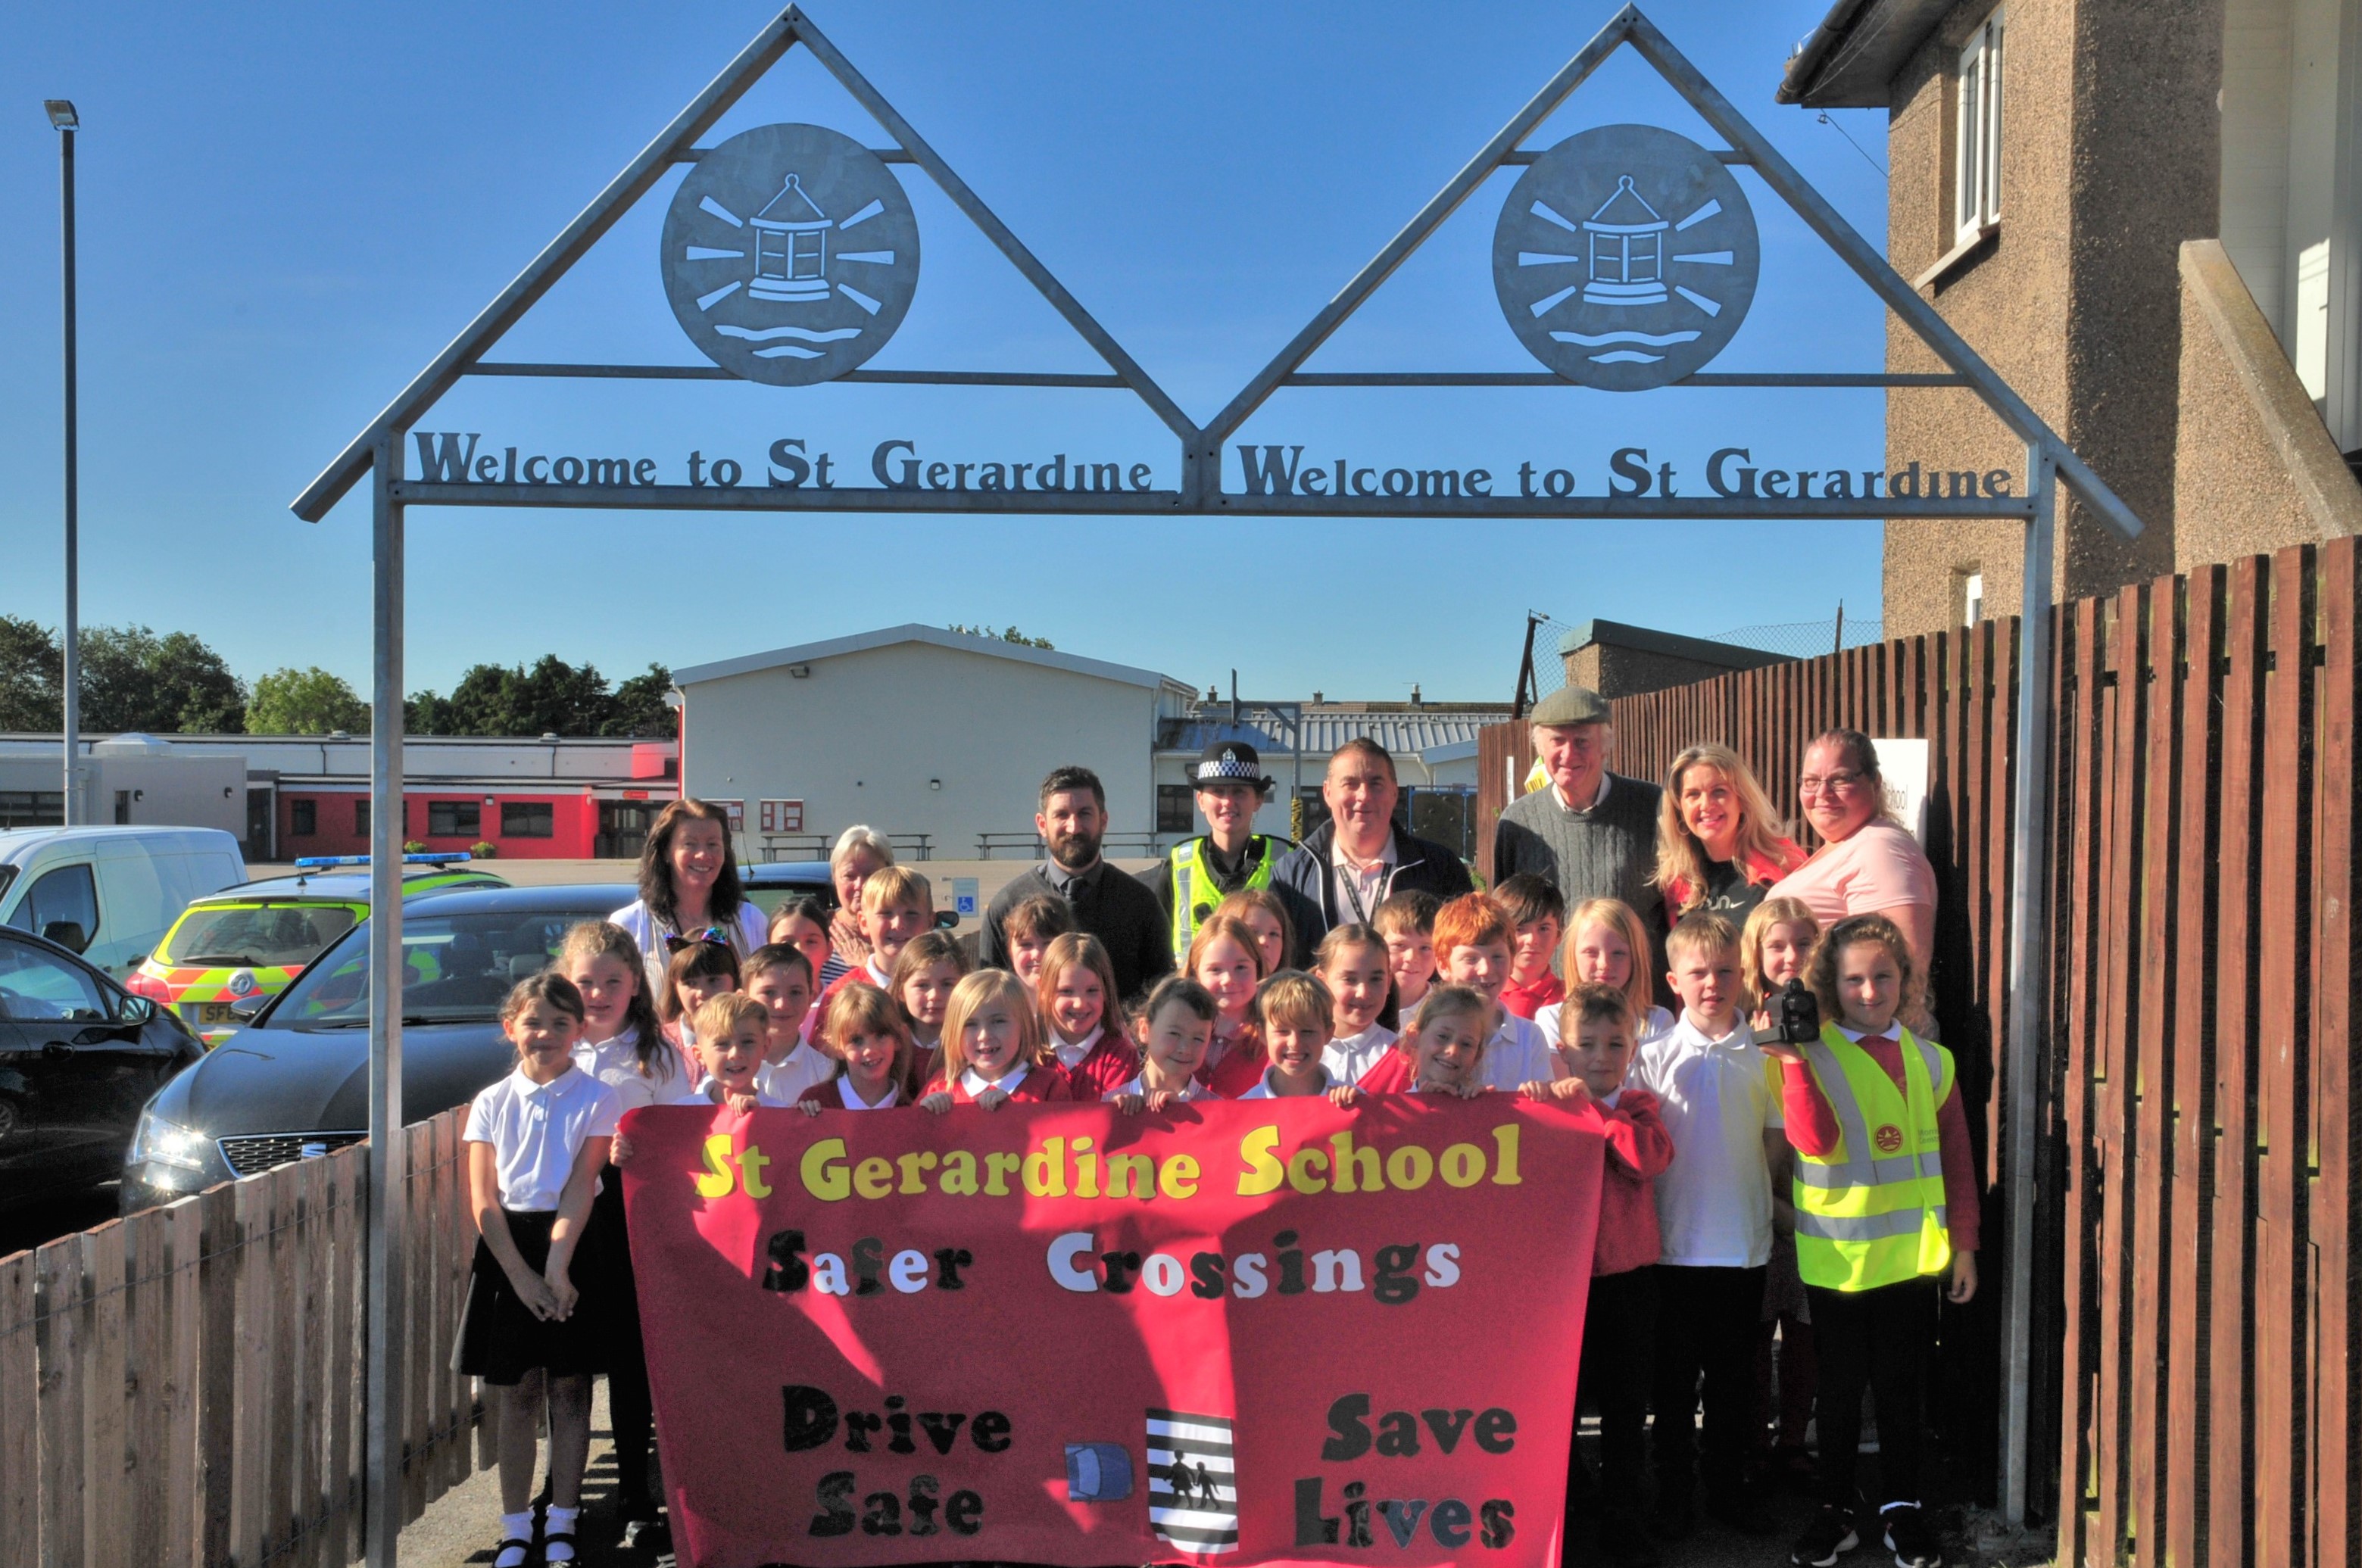 Pupils at St Gerardine Primary School in Lossiemouth will educate speeding drivers.